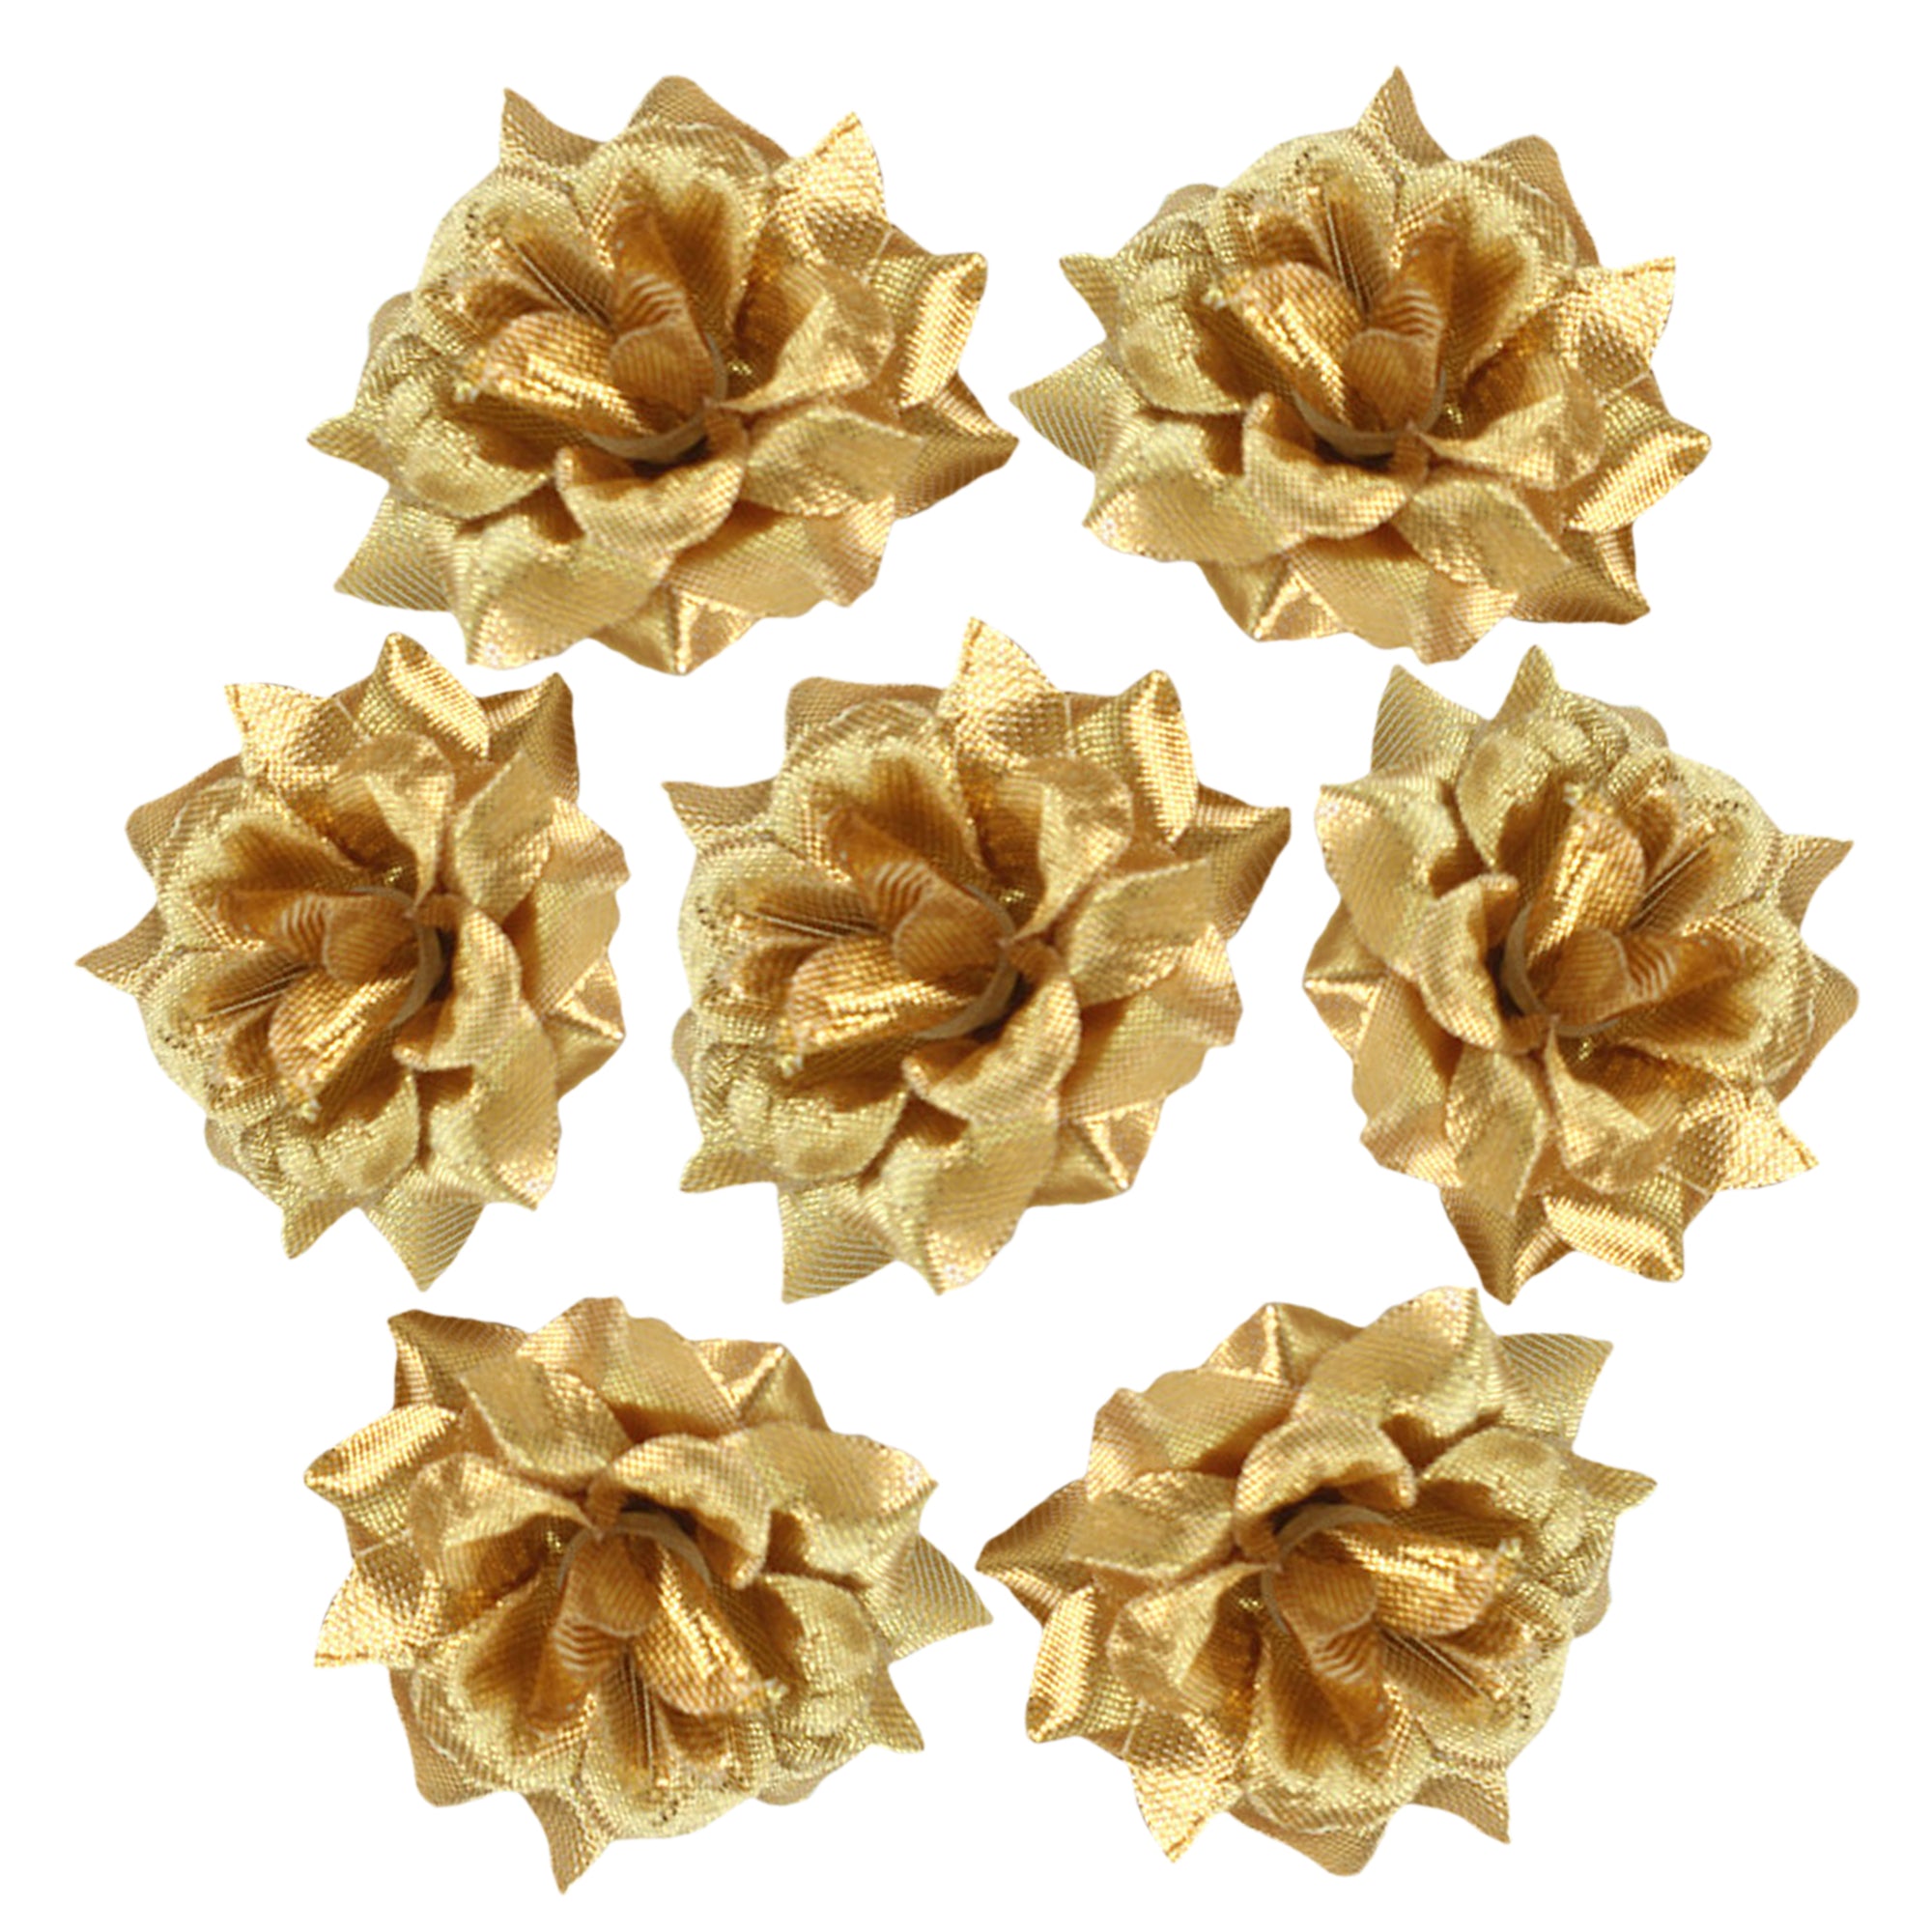 Small Silk Roses Flowers in Bulk Flocking Flowers 100 pcs for Hairpins Crafts